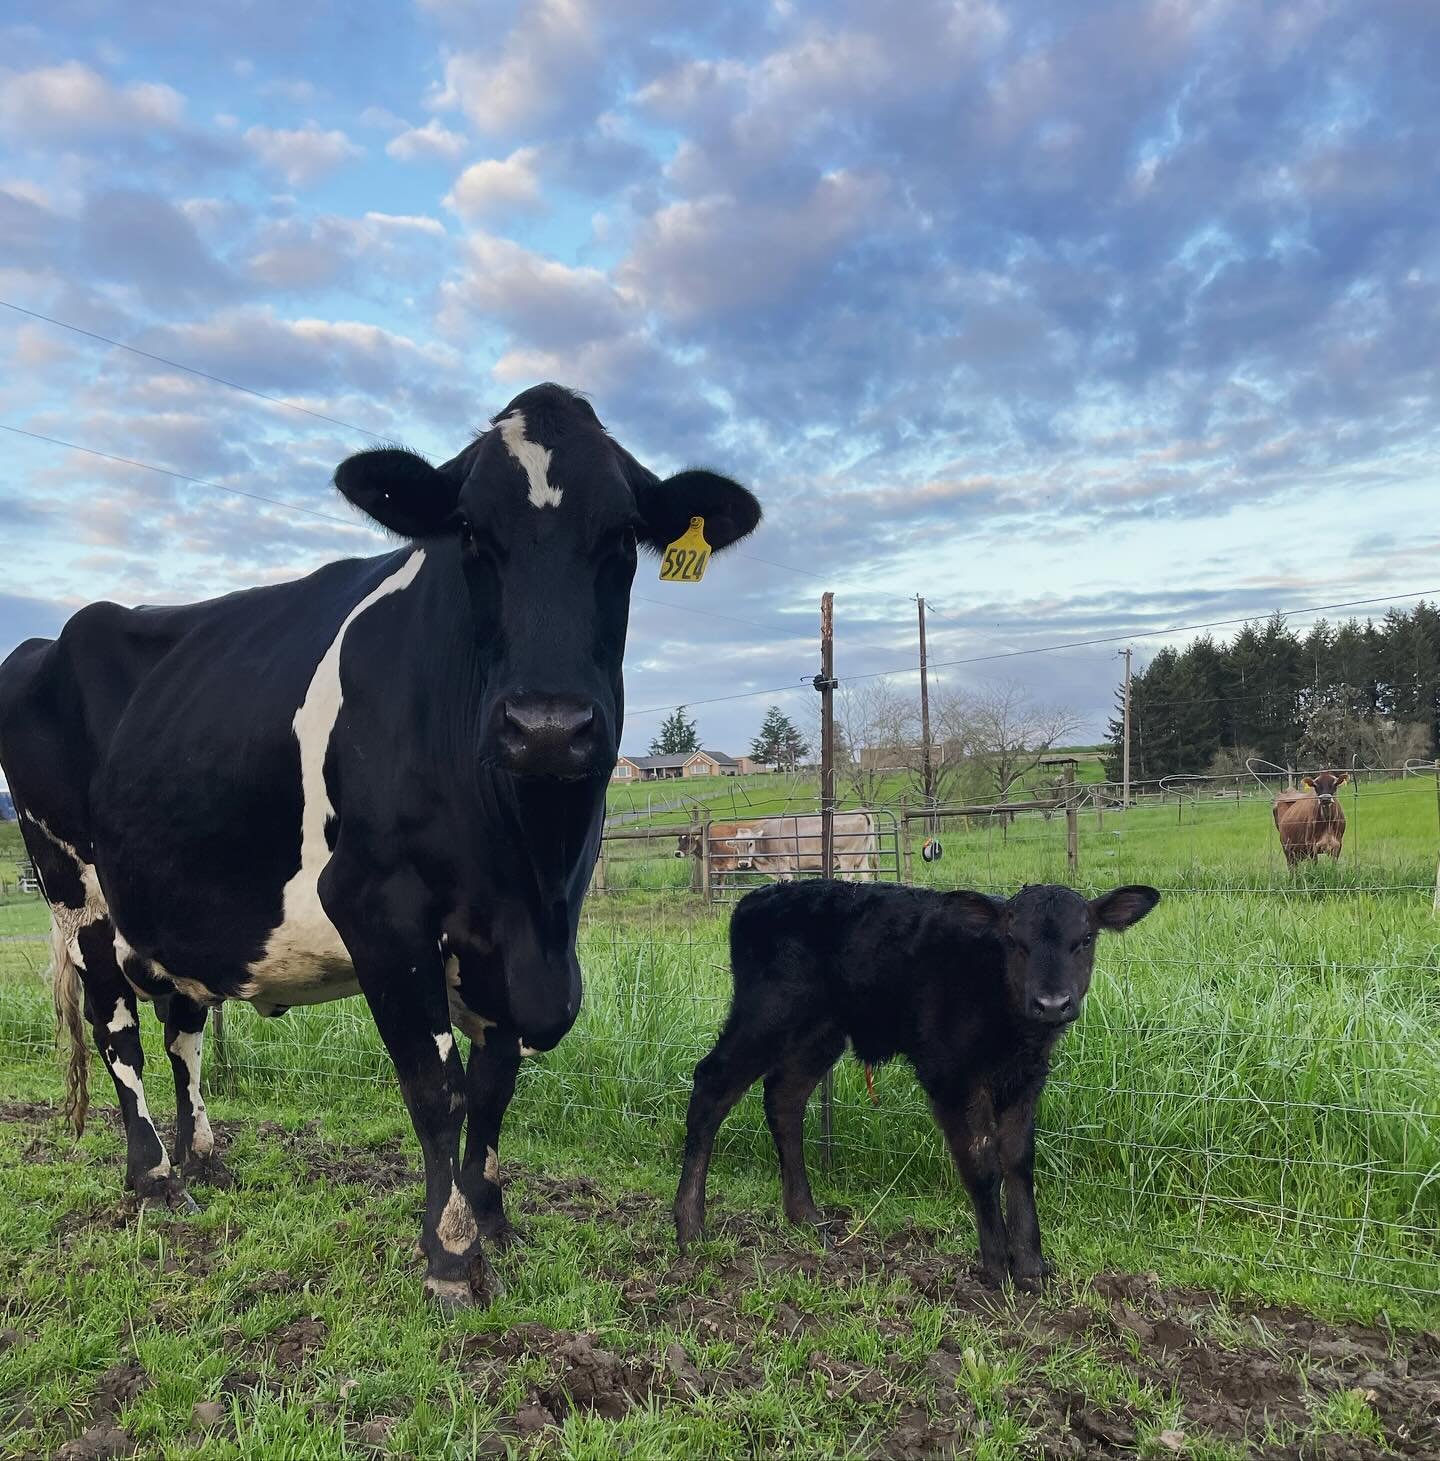 It&rsquo;s a beautiful morning for a beautiful baby! Miss Raya greeted me this morning proudly with a healthy heifer (girl). Mom and baby are doing great while the aunties look on.

 #raya #babycow #babyanimals #springbaby #godspeedhollow